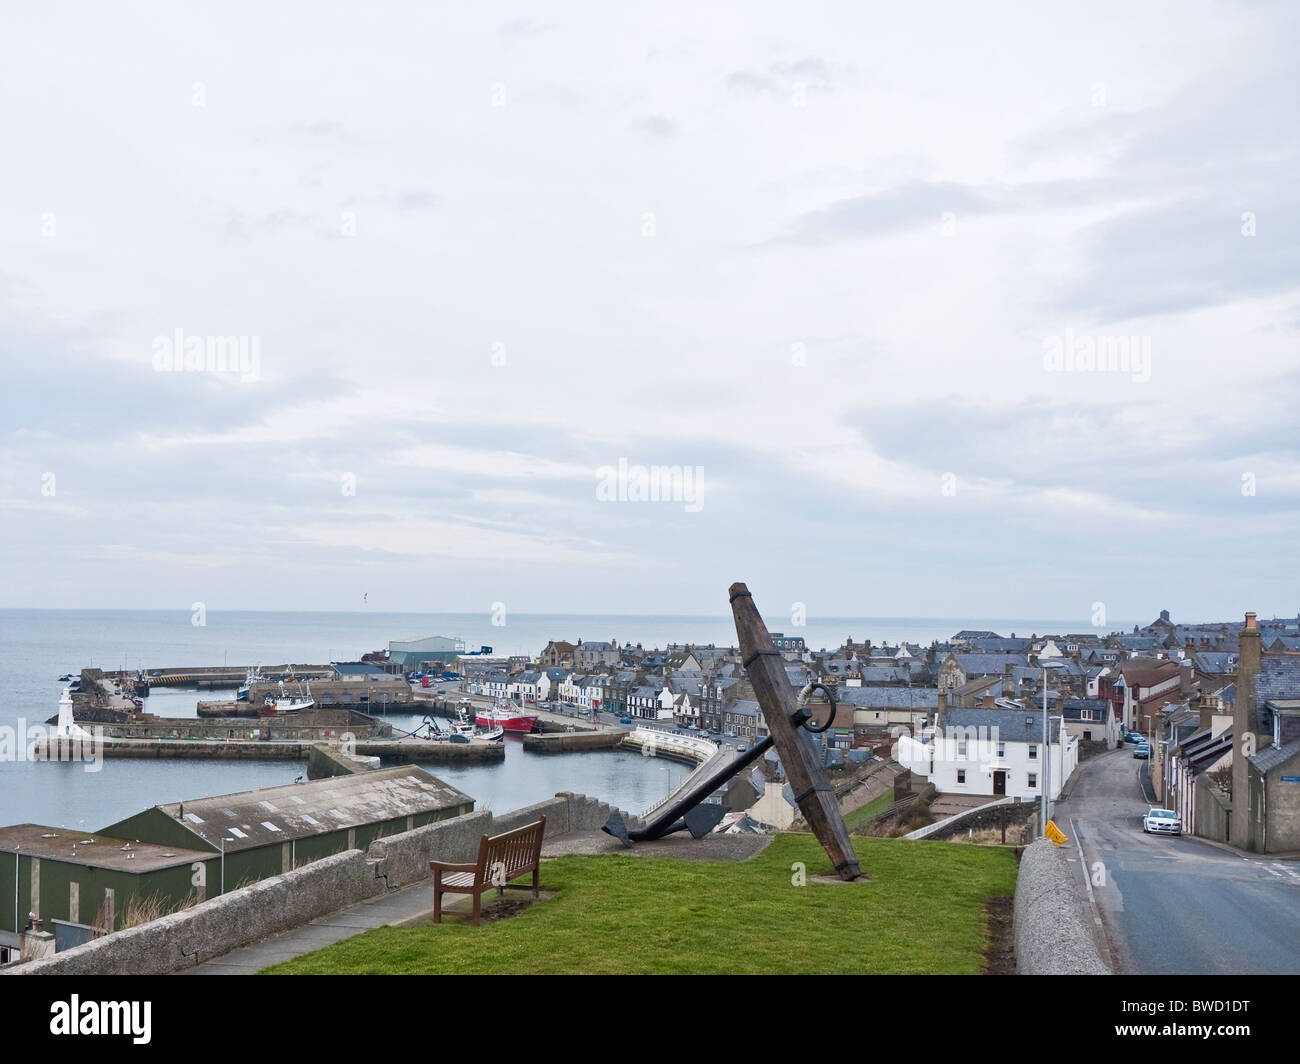 View over Maduff harbour from Church Street with bench and large anchor in the foreground, Macduff, Aberdeenshire, Scotland, UK Stock Photo